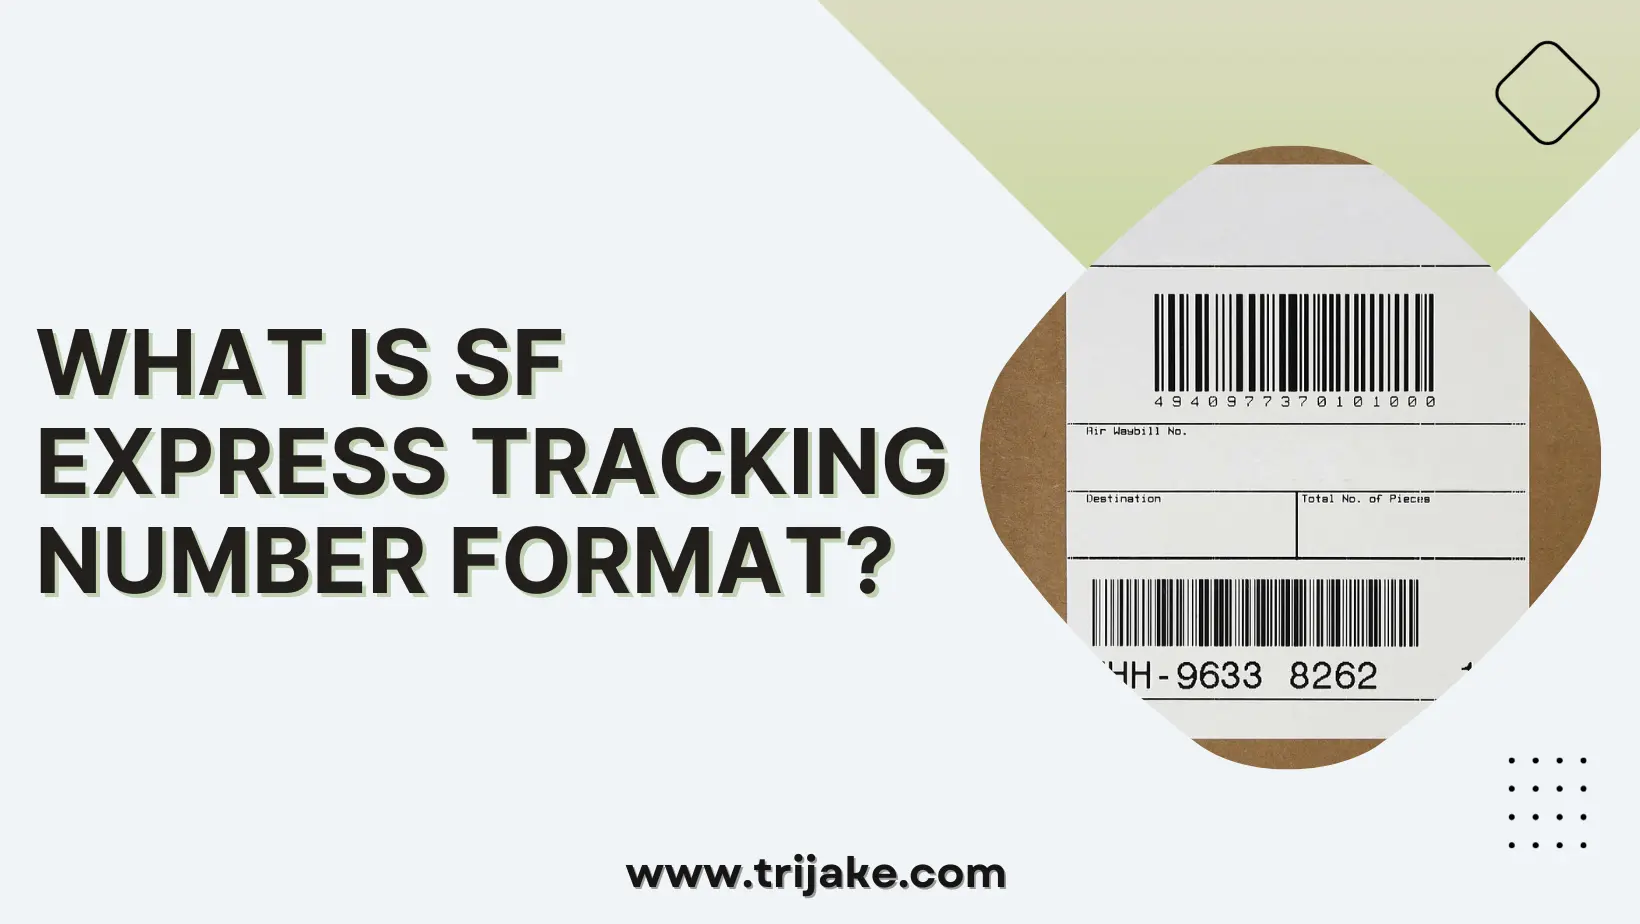 SF Express Tracking Number